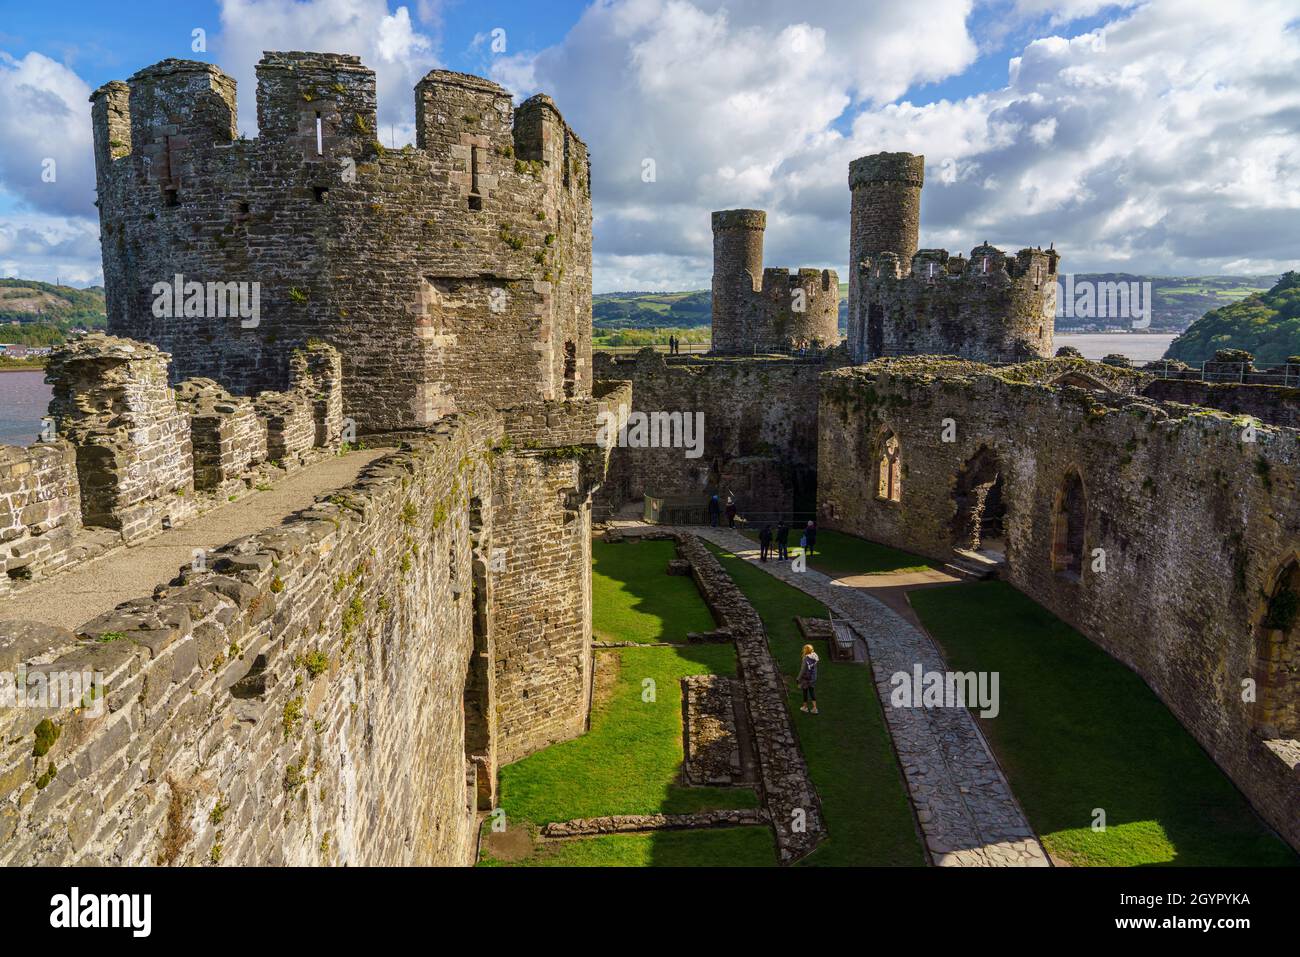 inside courtyard of the well preserved 13th century medieval Conwy castle, seen from the East side of the imposing fortress in North Wales Stock Photo